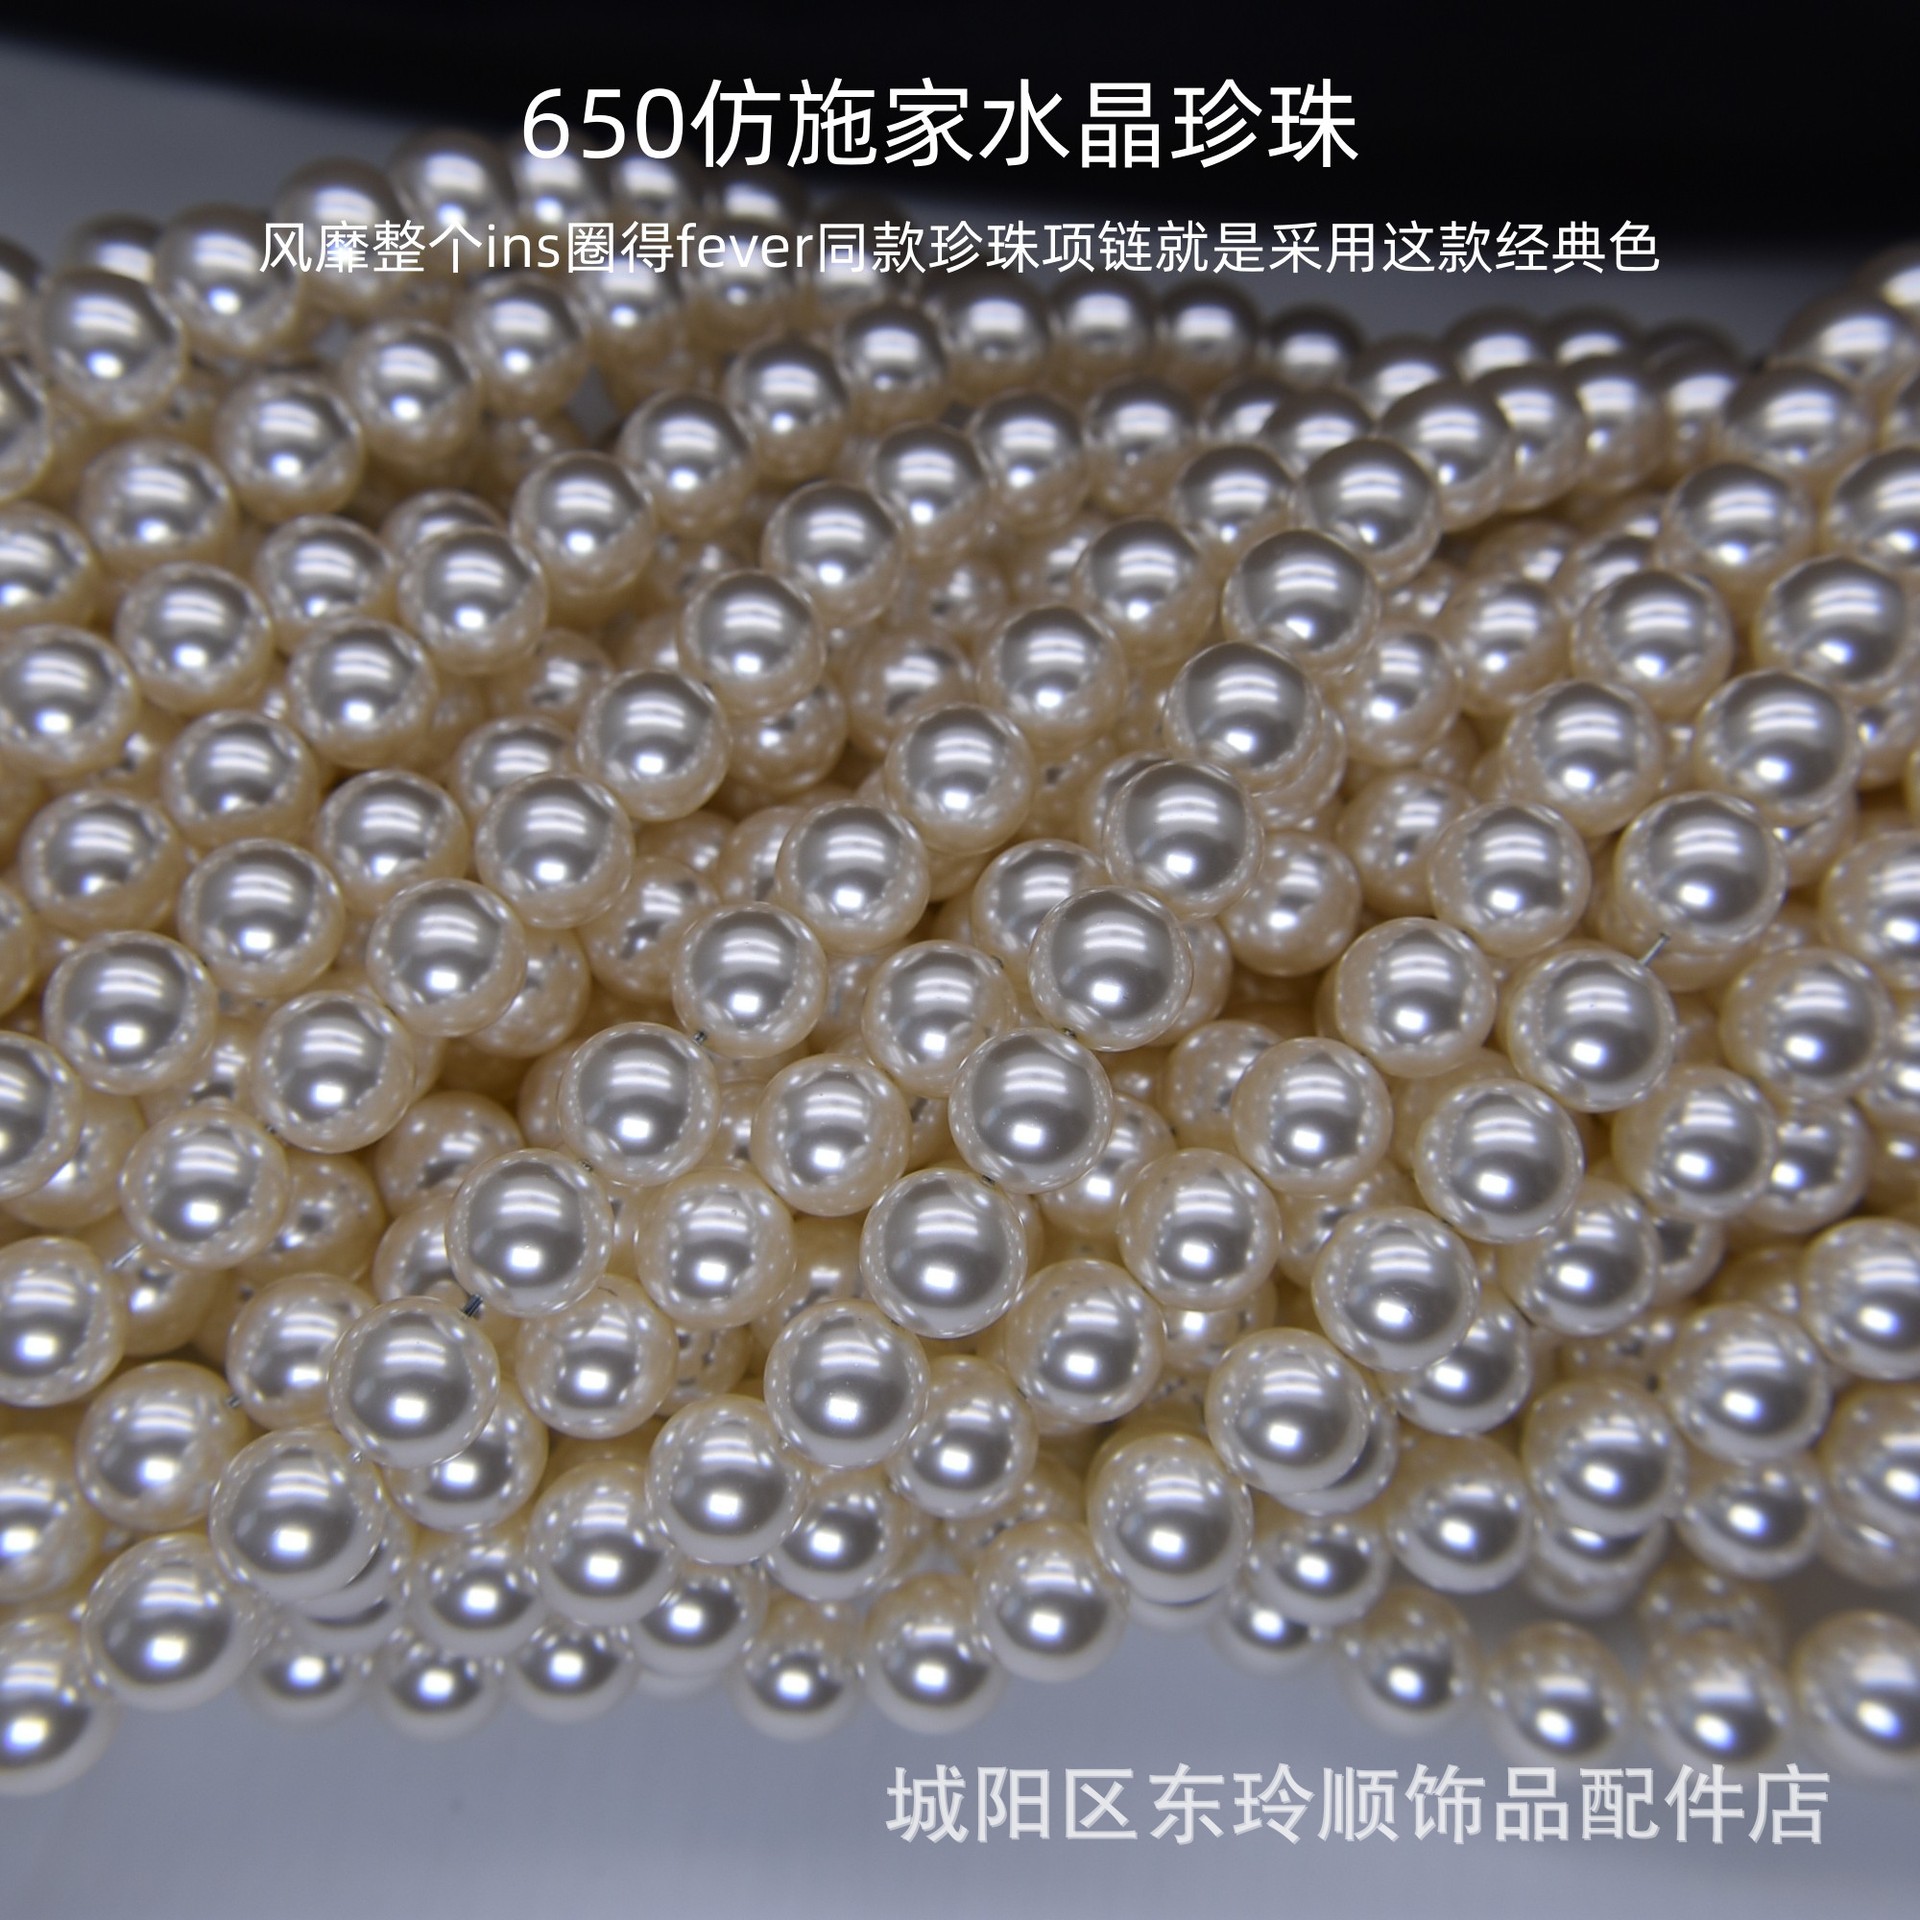 Imitation Shijia Pearl 650 Scattered Beads White Perfect Circle Crystal Pearl Necklace Bracelet Pendant Semi-Finished DIY Accessories Beads